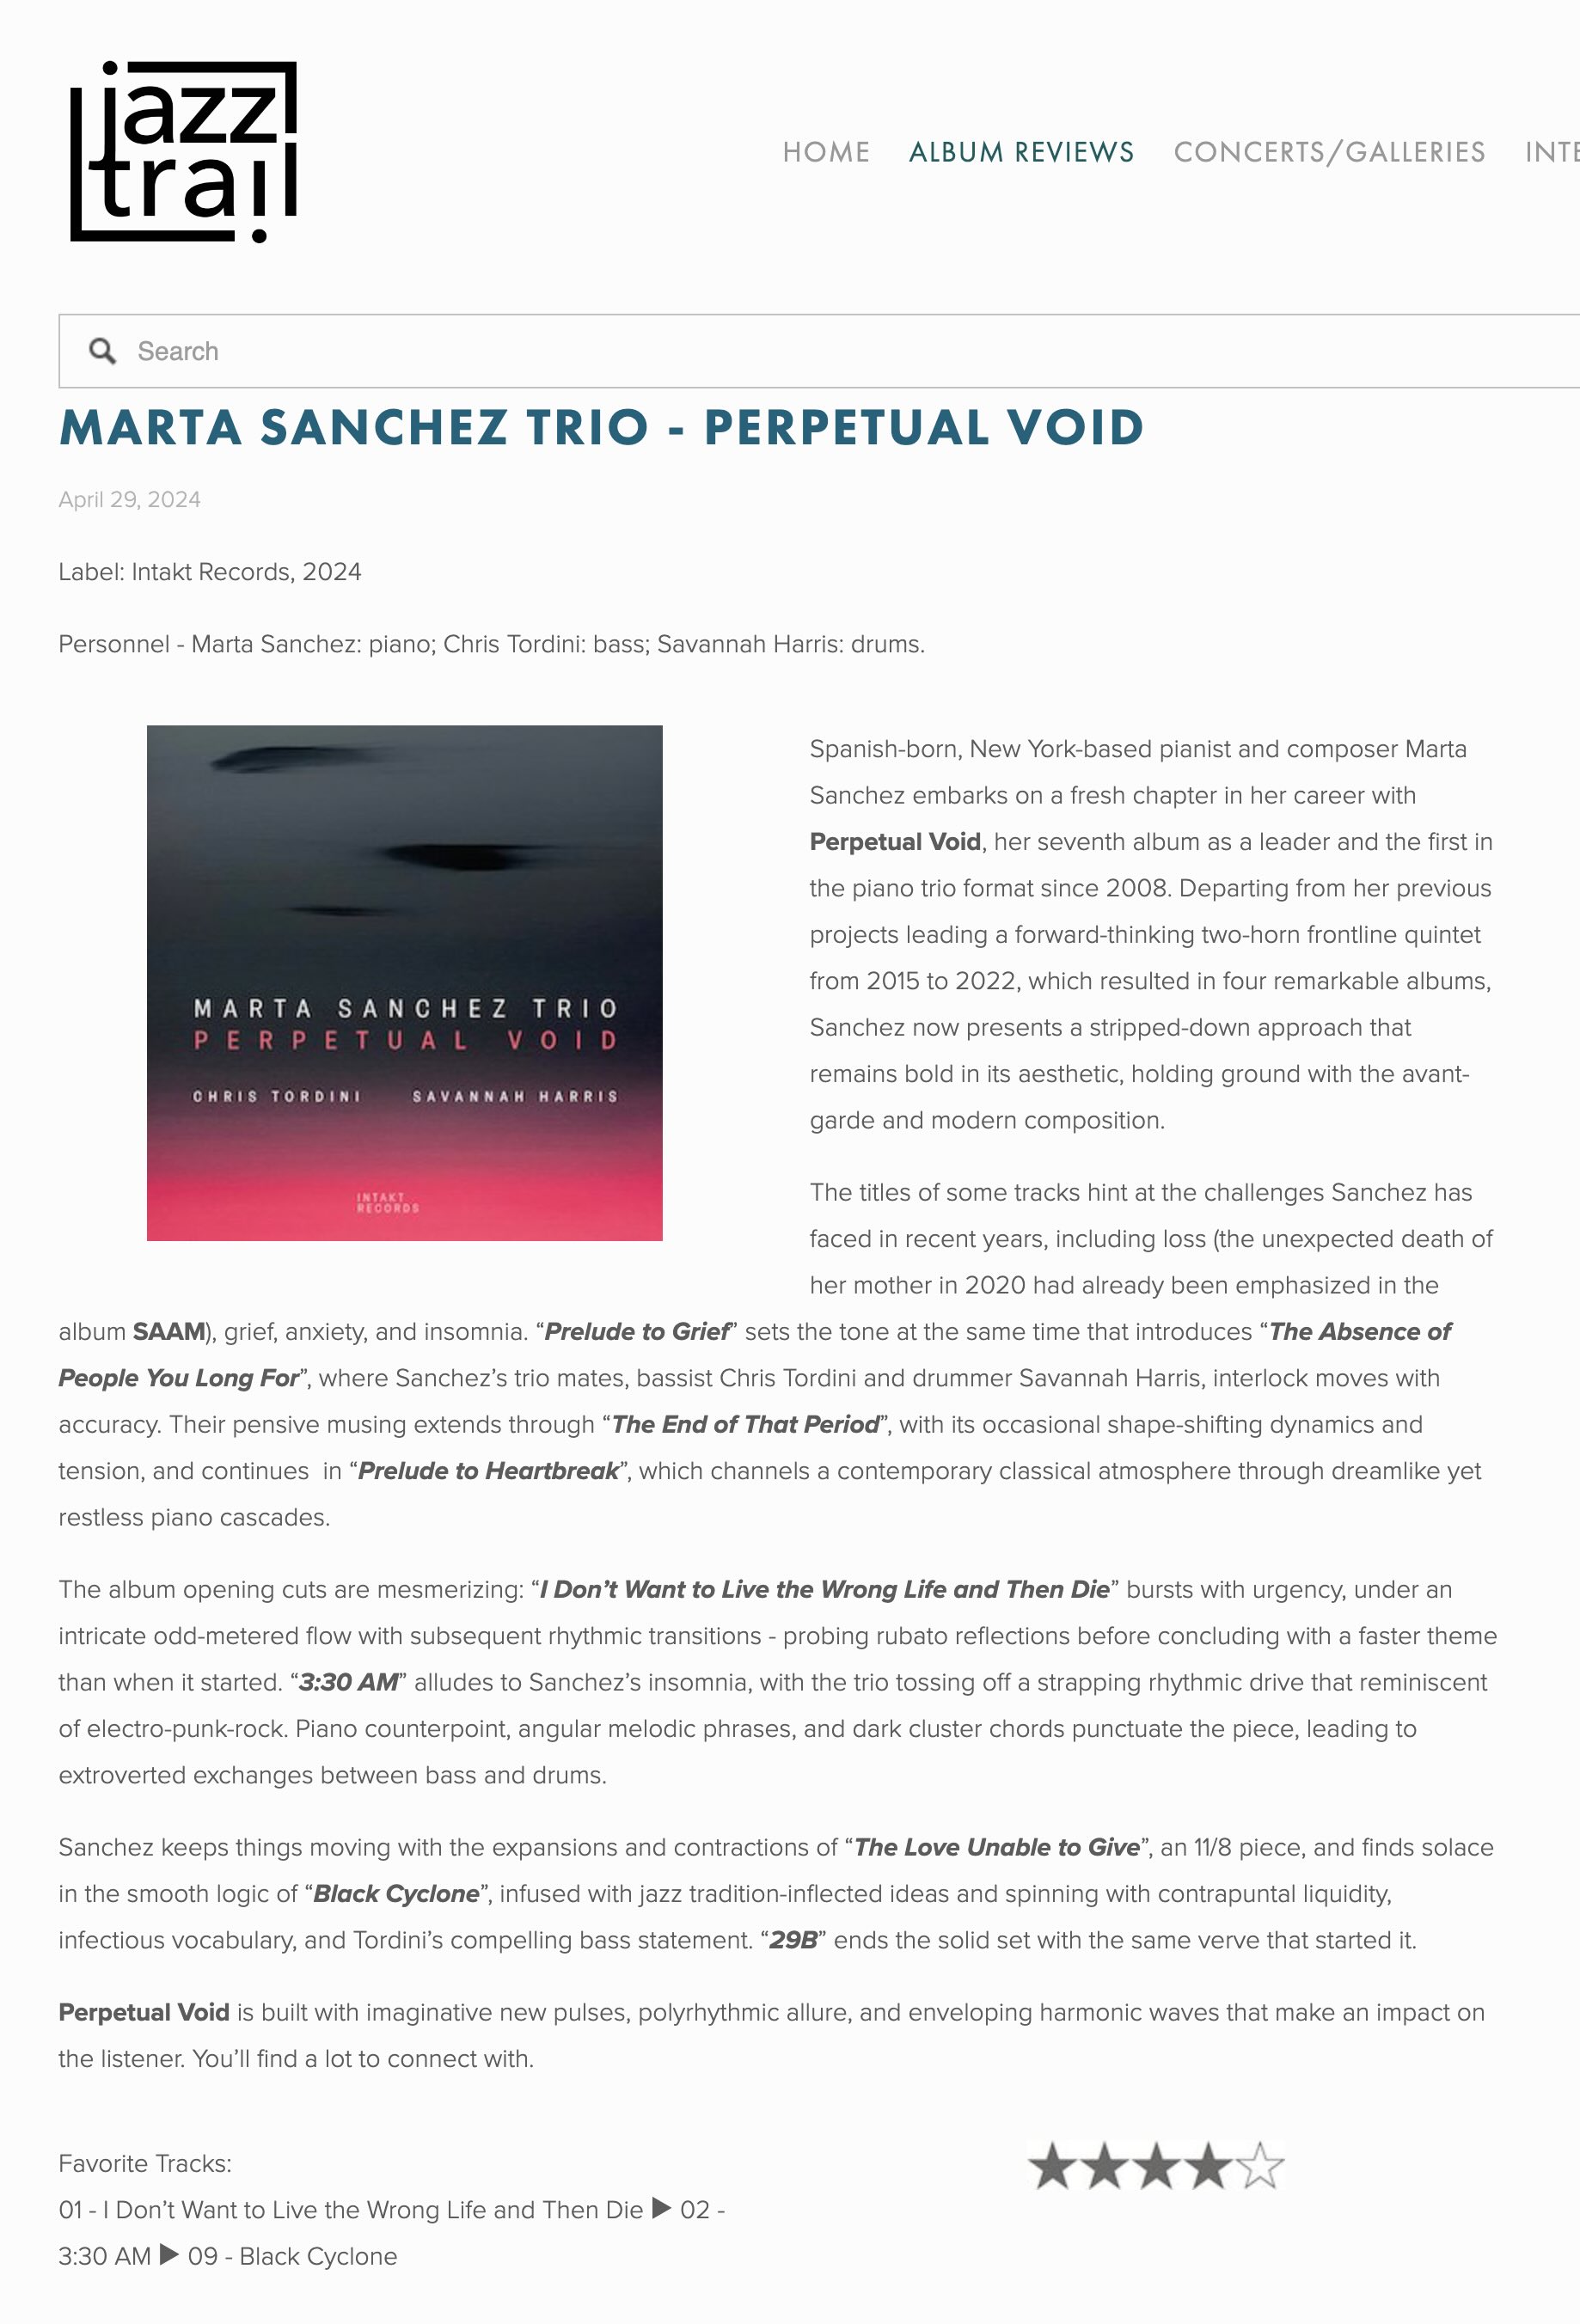 Spanish-born, New York-based pianist and composer Marta Sanchez embarks on a fresh chapter in her career with Perpetual Void, her seventh album as a leader and the first in the piano trio format since 2008. Departing from her previous projects leading a forward-thinking two-horn frontline quintet from 2015 to 2022, which resulted in four remarkable albums, Sanchez now presents a stripped-down approach that remains bold in its aesthetic, holding ground with the avant-garde and modern composition.